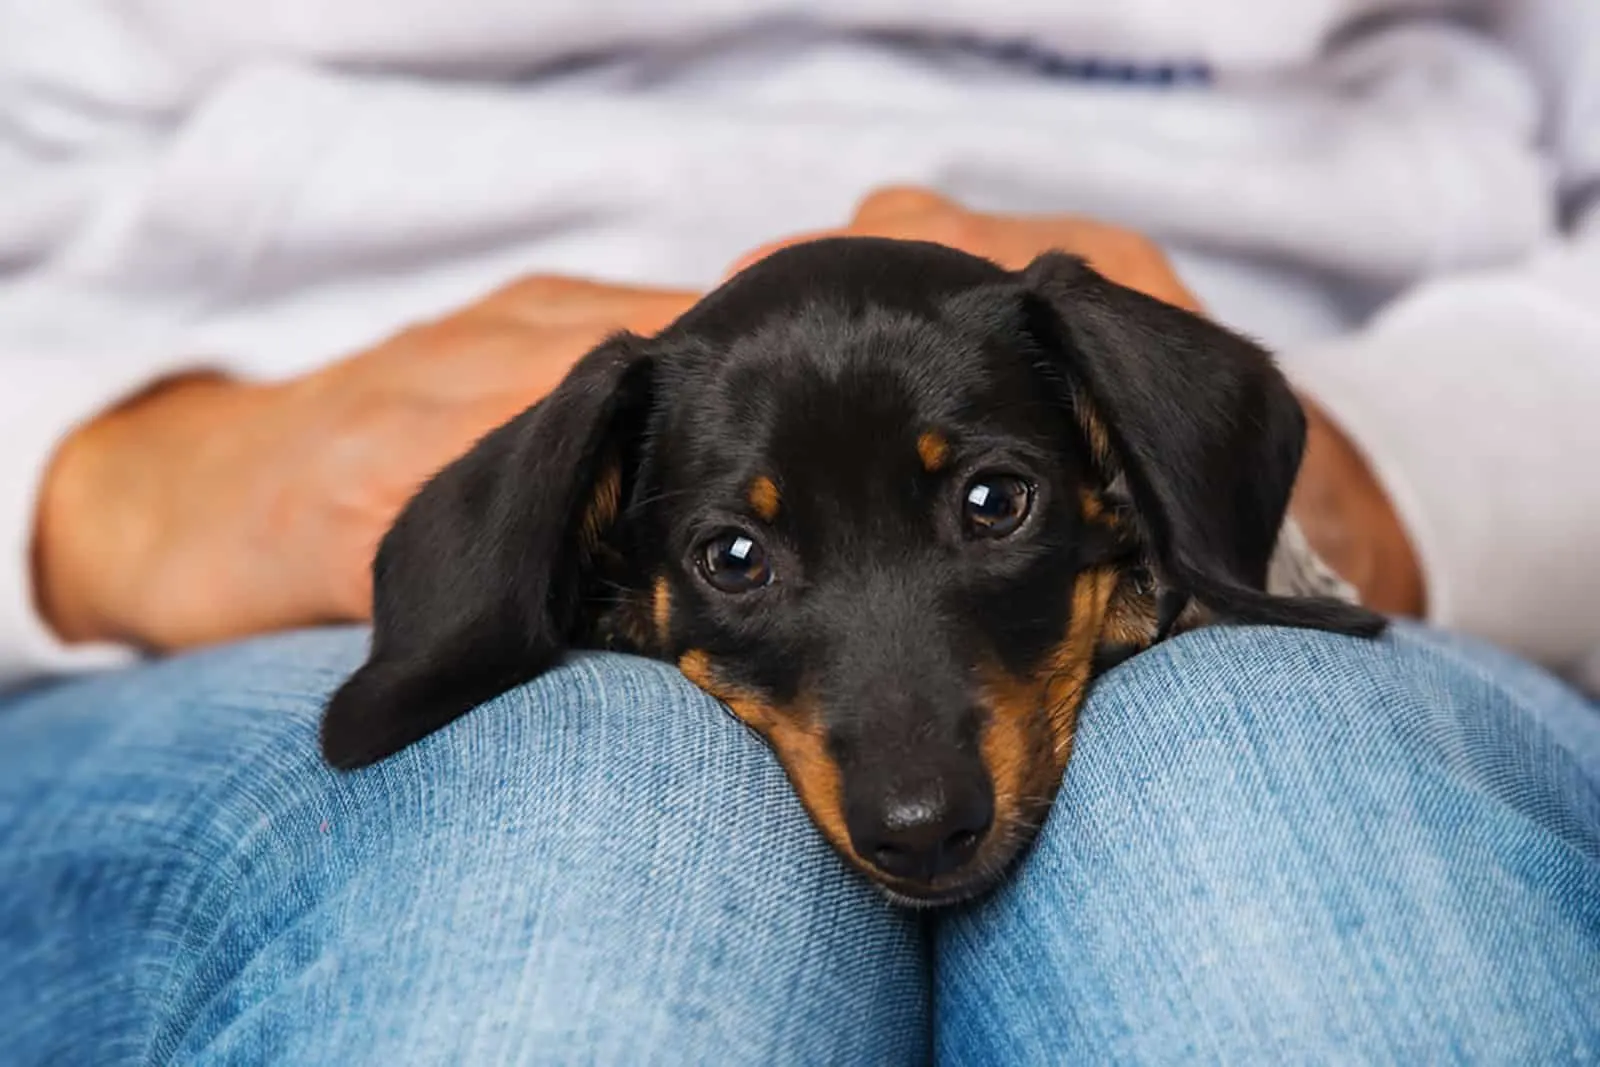 dachshund puppy lying on his owner's knees